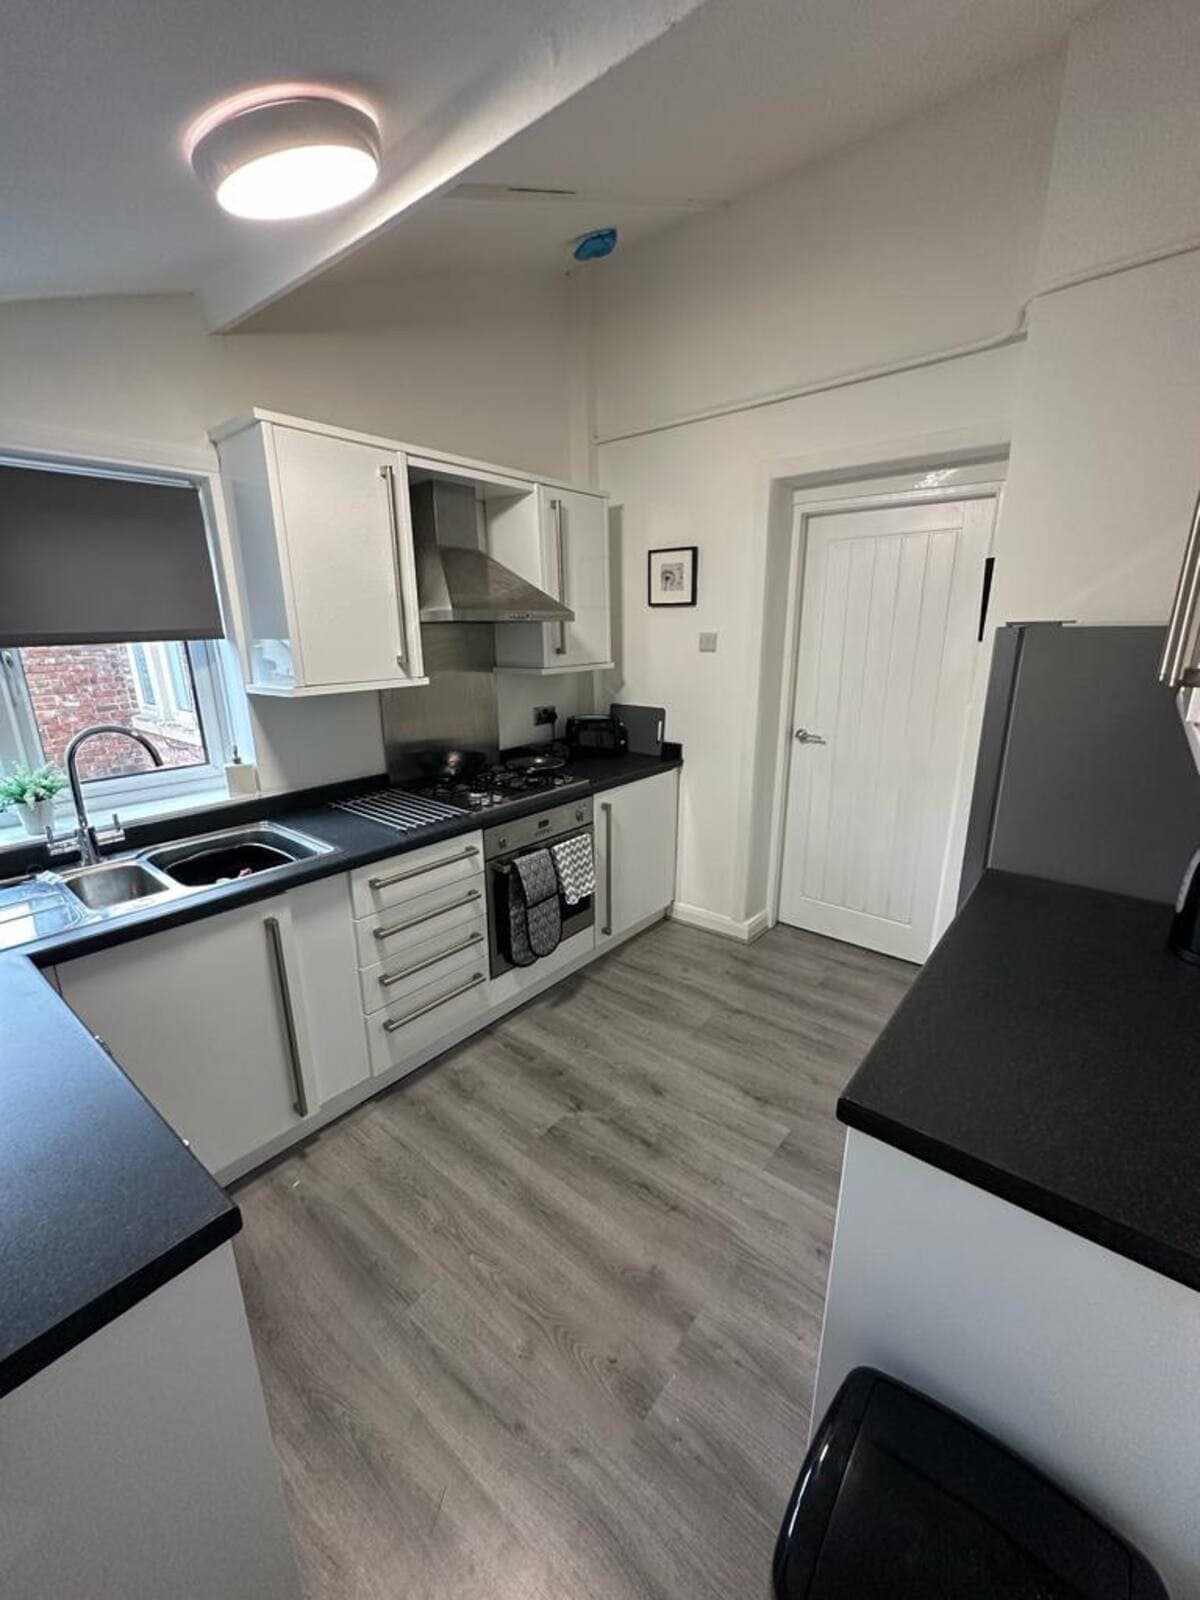 3 Bedroom Apartment in the heart of Gateshead